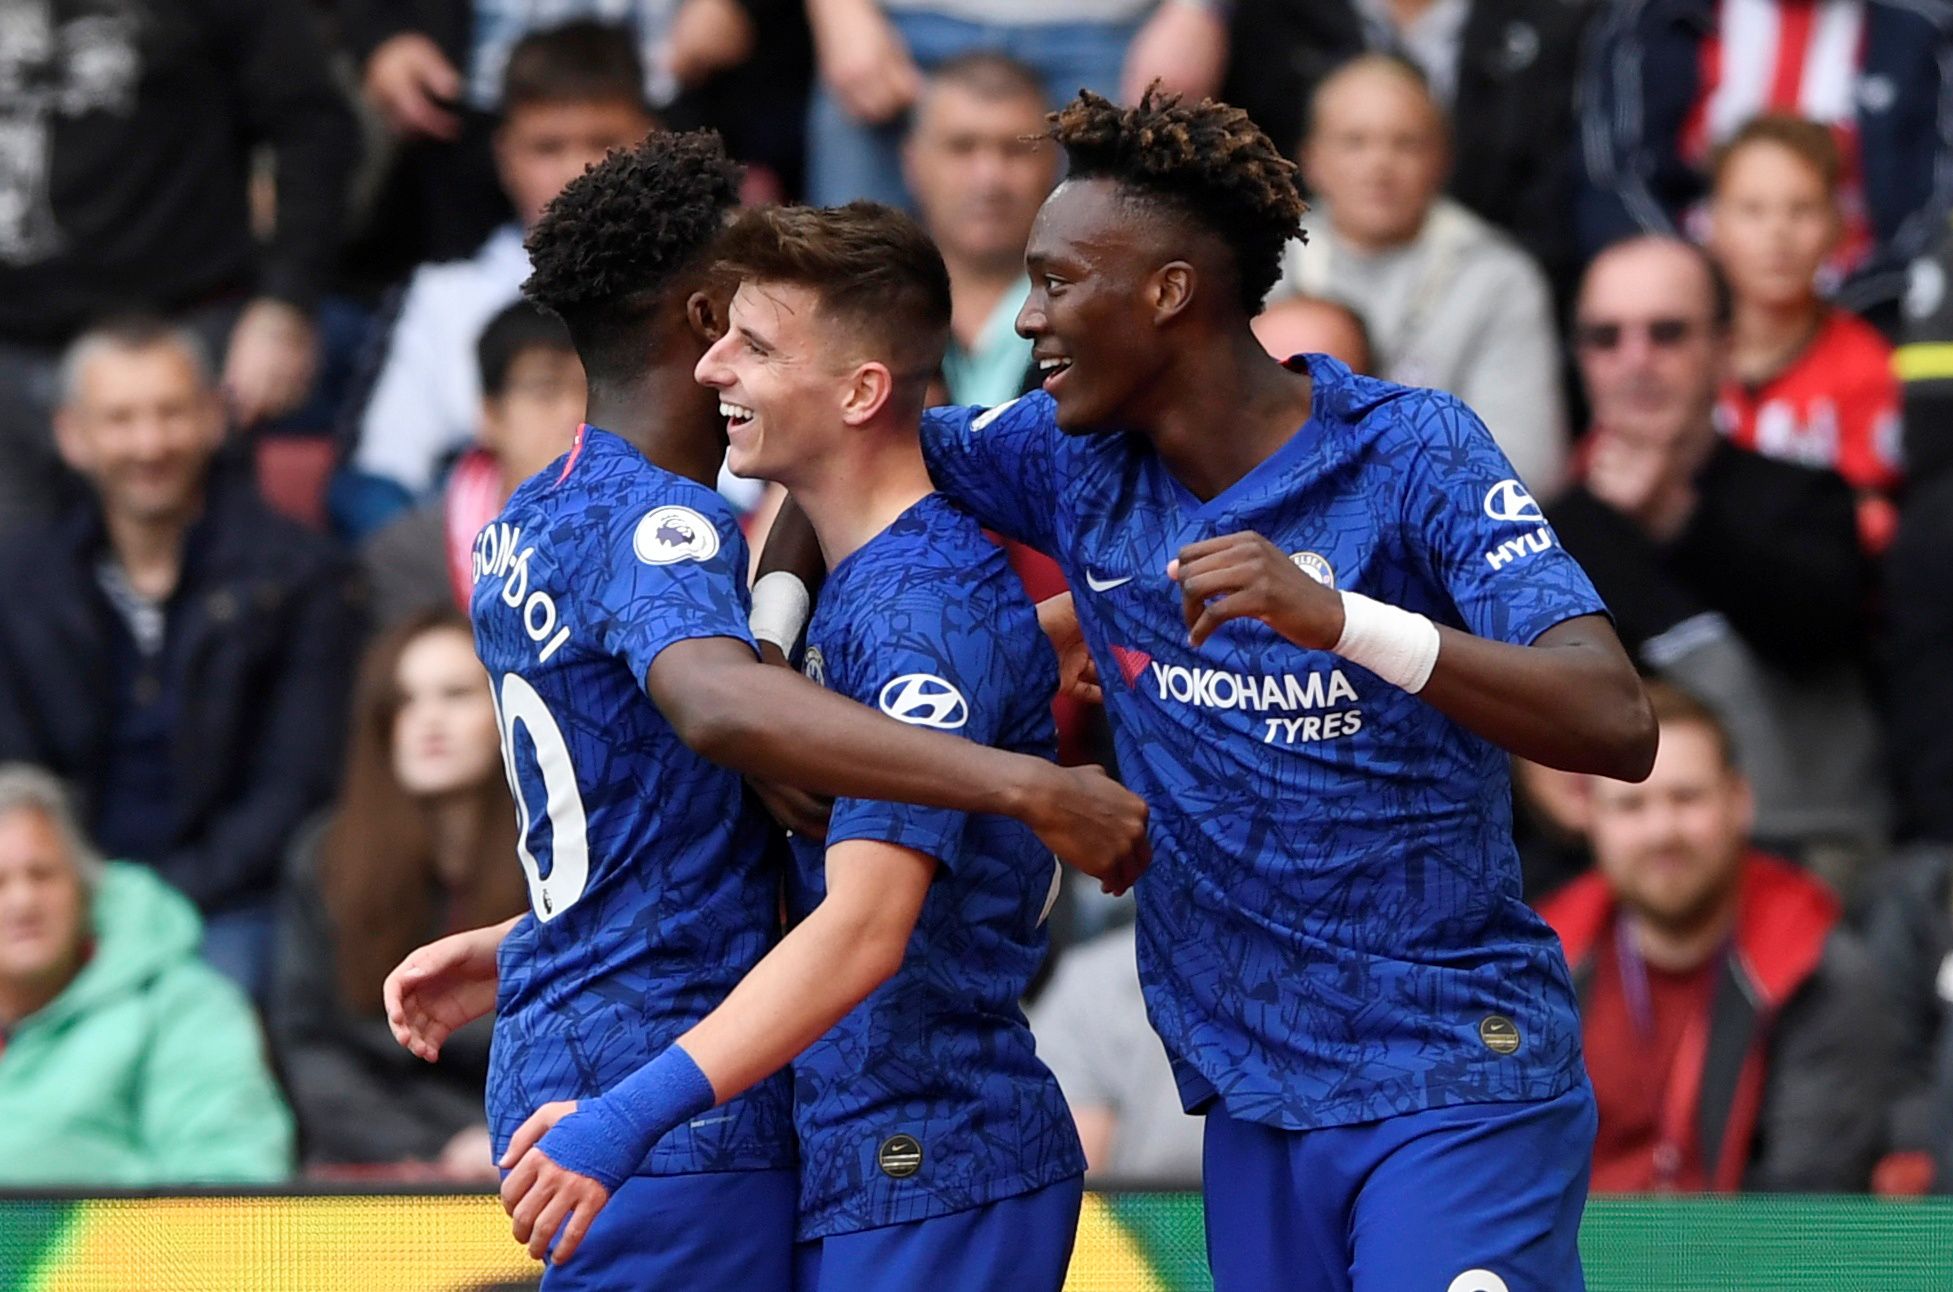 Soccer Football - Premier League - Southampton v Chelsea - St Mary's Stadium, Southampton, Britain - October 6, 2019  Chelsea's Mason Mount celebrates scoring their second goal with Callum Hudson-Odoi and Tammy Abraham   Action Images via Reuters/Tony O'Brien  EDITORIAL USE ONLY. No use with unauthorized audio, video, data, fixture lists, club/league logos or 